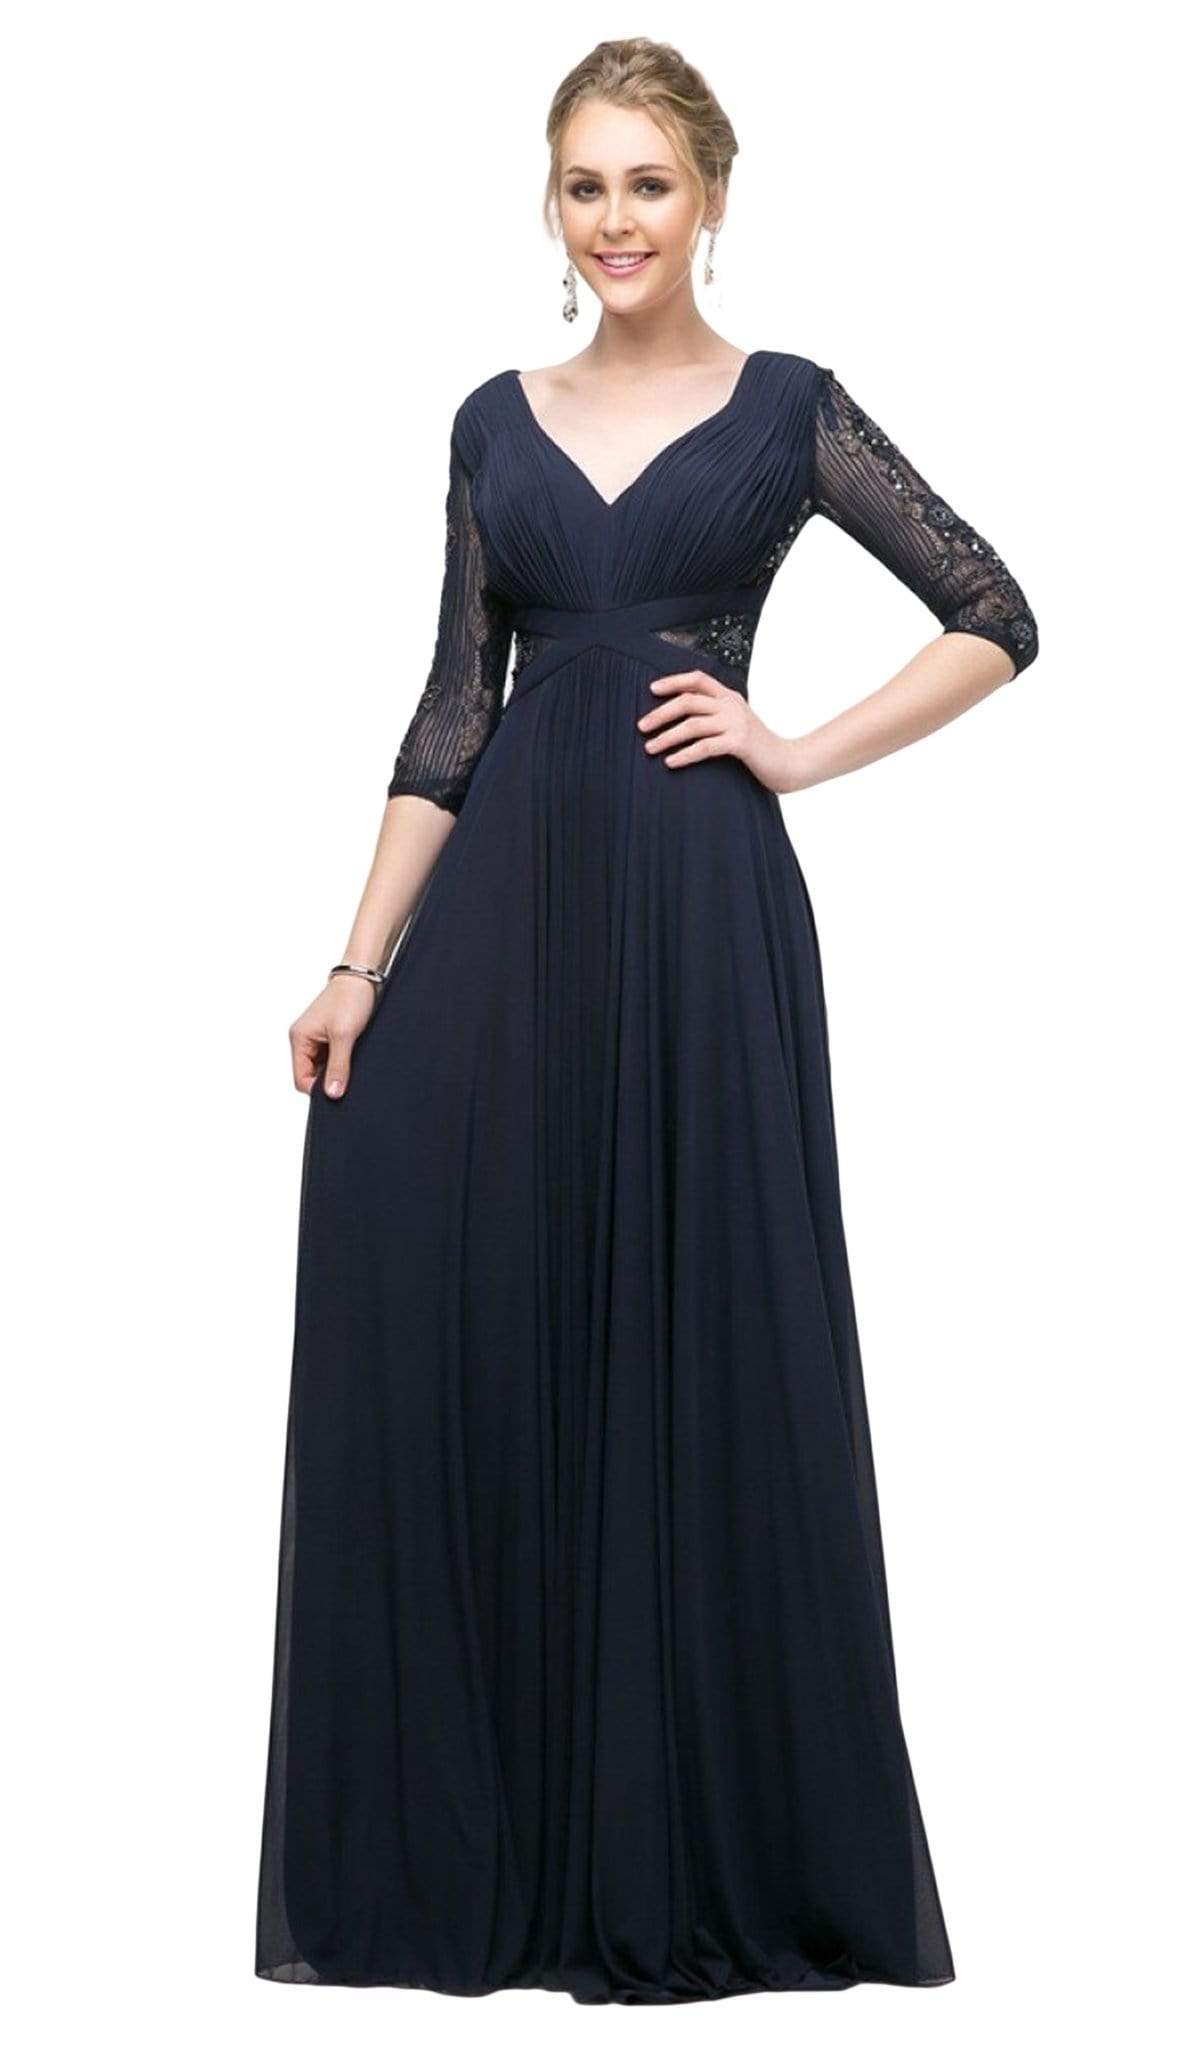 Cinderella Divine - CR785 Beaded Embroidered Empire Waist Long Dress Special Occasion Dress 2 / Navy